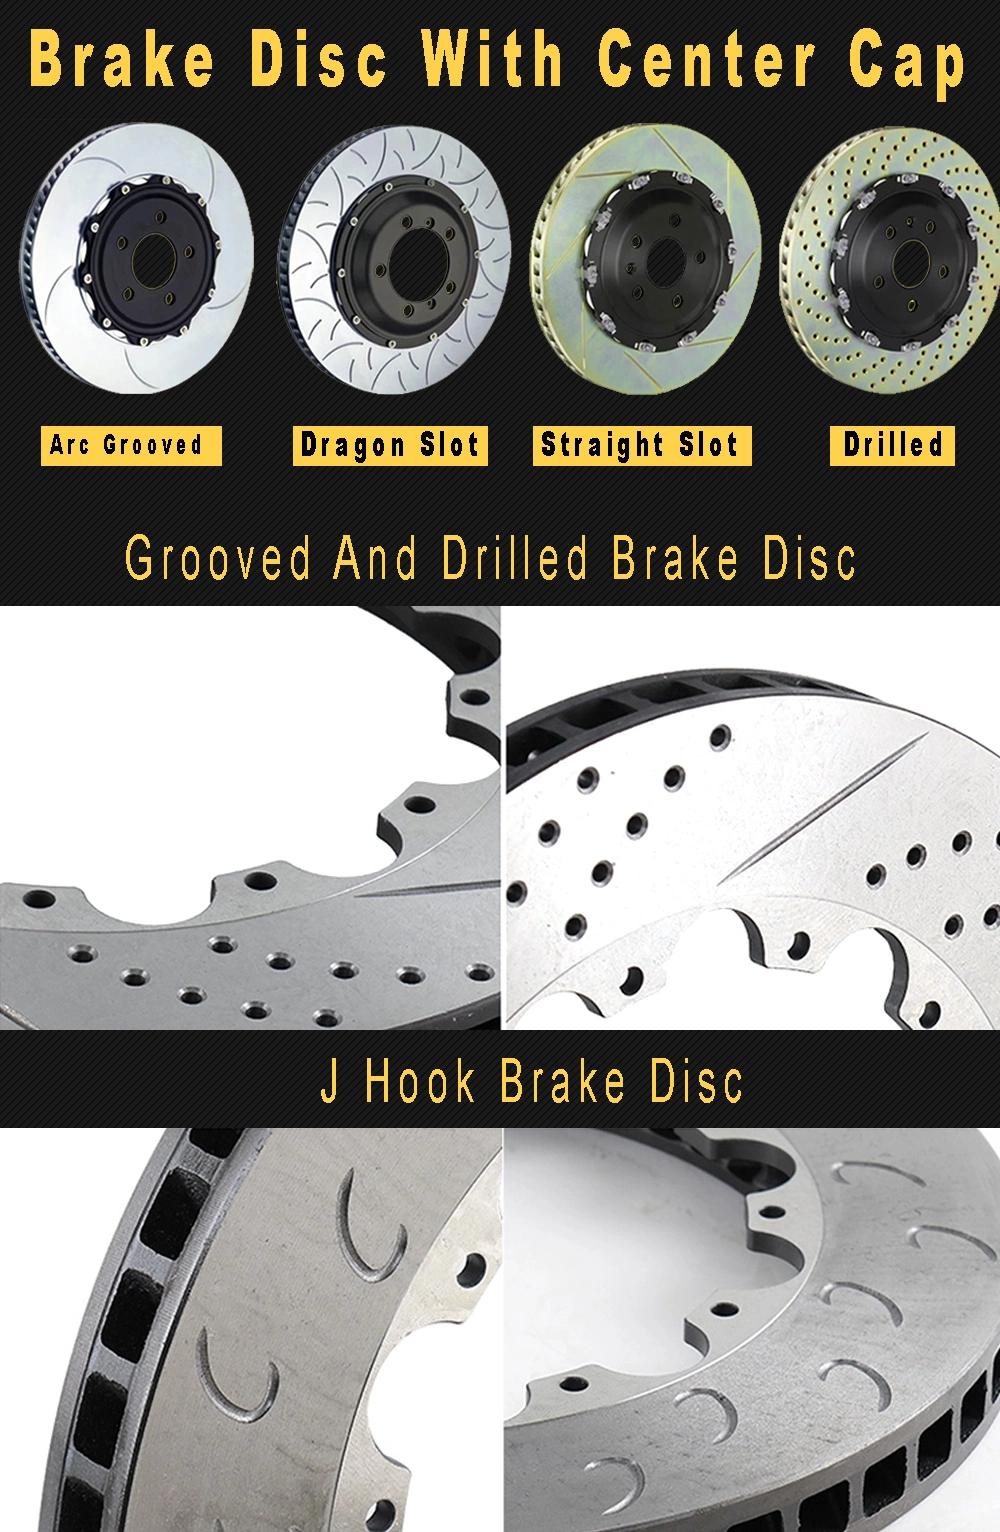 Wholesale Parts Sollted and Drilled Brake Disc/Plate Rotor 45251ty3a00 for Honda